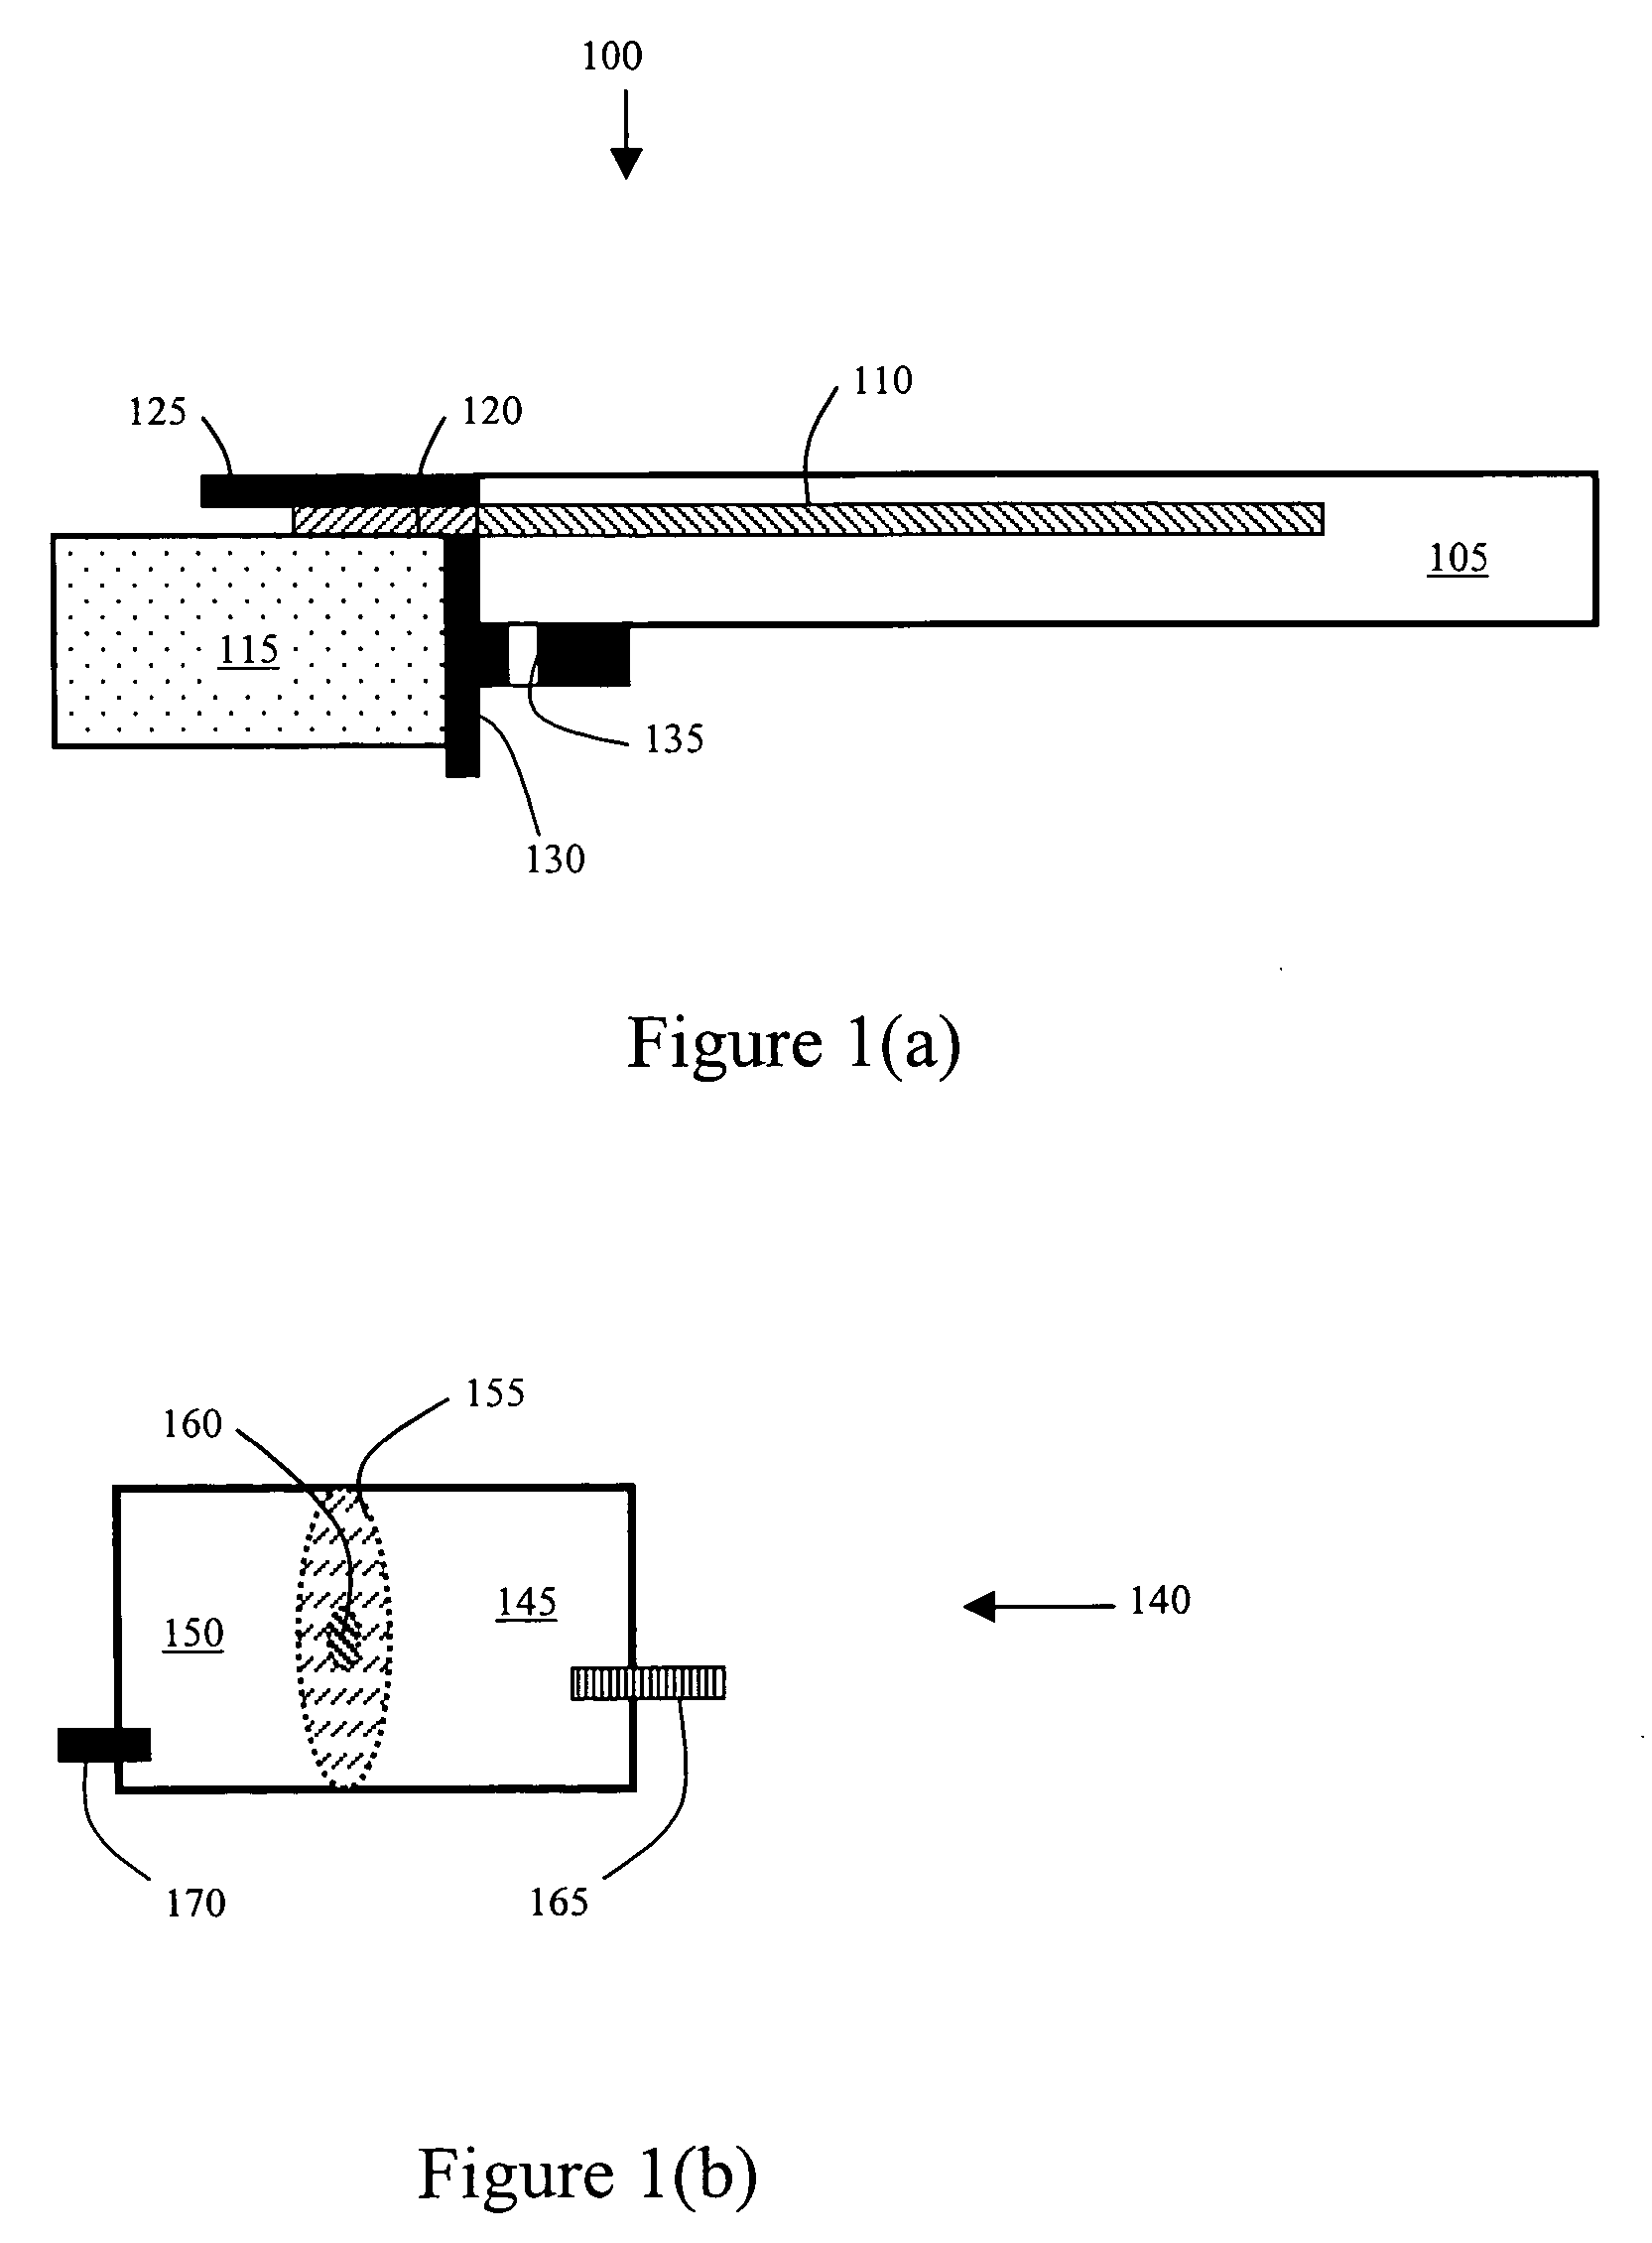 Oral fluid collector with integrated drug screening system